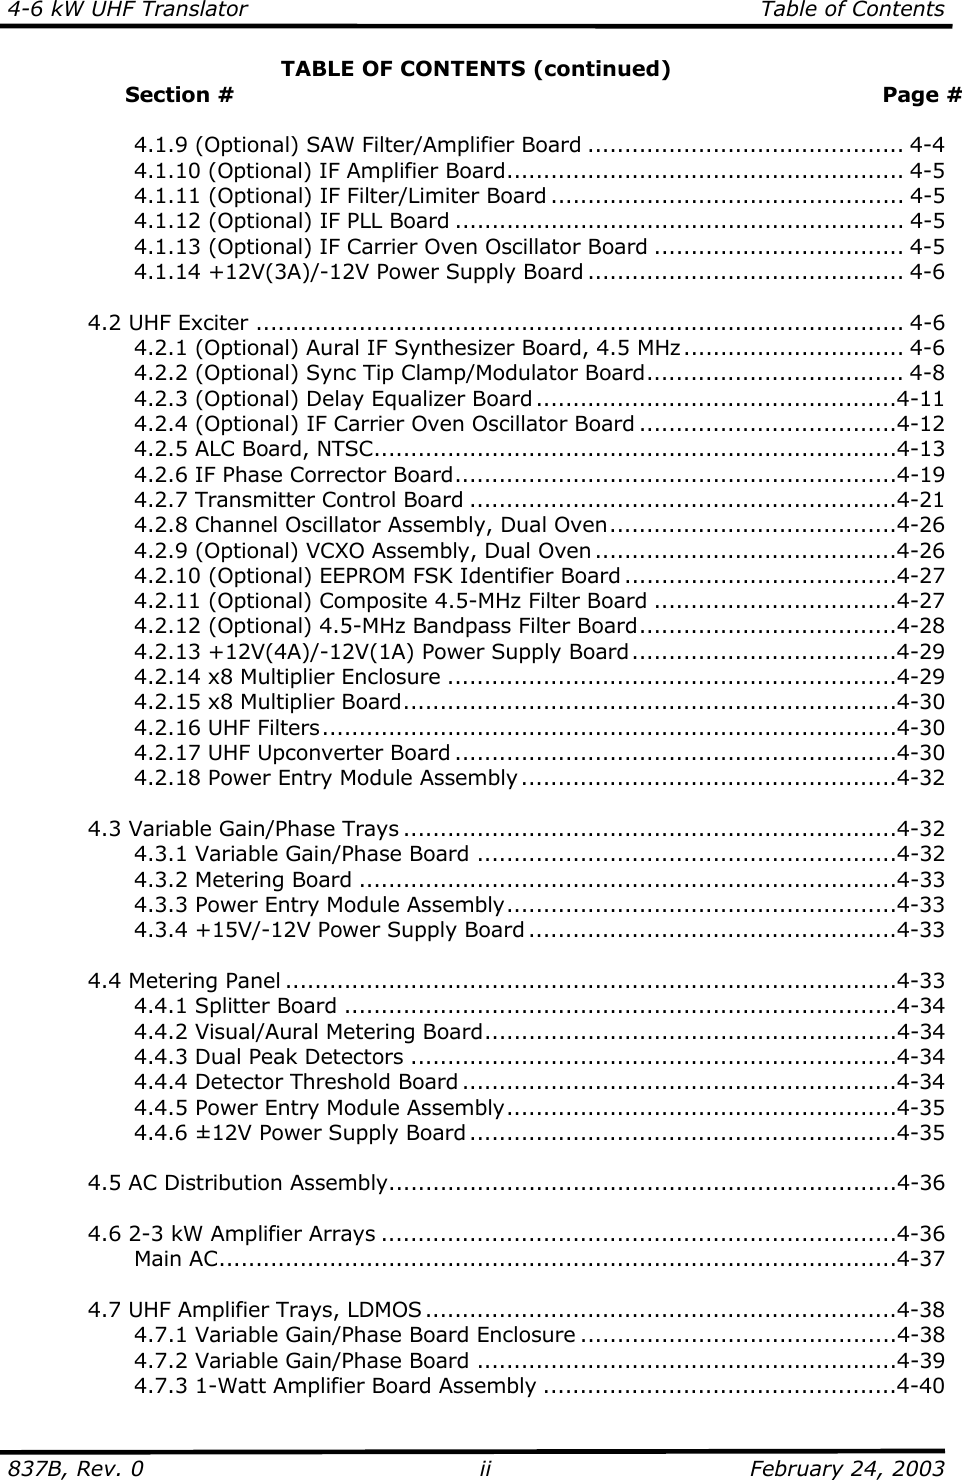 4-6 kW UHF Translator  Table of Contents  837B, Rev. 0 ii  February 24, 2003 TABLE OF CONTENTS (continued)                  Section #  Page #      4.1.9 (Optional) SAW Filter/Amplifier Board ........................................... 4-4     4.1.10 (Optional) IF Amplifier Board...................................................... 4-5     4.1.11 (Optional) IF Filter/Limiter Board ................................................ 4-5     4.1.12 (Optional) IF PLL Board ............................................................. 4-5     4.1.13 (Optional) IF Carrier Oven Oscillator Board .................................. 4-5   4.1.14 +12V(3A)/-12V Power Supply Board ........................................... 4-6    4.2 UHF Exciter ........................................................................................ 4-6     4.2.1 (Optional) Aural IF Synthesizer Board, 4.5 MHz.............................. 4-6     4.2.2 (Optional) Sync Tip Clamp/Modulator Board................................... 4-8     4.2.3 (Optional) Delay Equalizer Board .................................................4-11     4.2.4 (Optional) IF Carrier Oven Oscillator Board ...................................4-12     4.2.5 ALC Board, NTSC.......................................................................4-13     4.2.6 IF Phase Corrector Board............................................................4-19     4.2.7 Transmitter Control Board ..........................................................4-21     4.2.8 Channel Oscillator Assembly, Dual Oven.......................................4-26     4.2.9 (Optional) VCXO Assembly, Dual Oven .........................................4-26     4.2.10 (Optional) EEPROM FSK Identifier Board .....................................4-27     4.2.11 (Optional) Composite 4.5-MHz Filter Board .................................4-27     4.2.12 (Optional) 4.5-MHz Bandpass Filter Board...................................4-28   4.2.13 +12V(4A)/-12V(1A) Power Supply Board....................................4-29     4.2.14 x8 Multiplier Enclosure .............................................................4-29     4.2.15 x8 Multiplier Board...................................................................4-30   4.2.16 UHF Filters..............................................................................4-30   4.2.17 UHF Upconverter Board ............................................................4-30     4.2.18 Power Entry Module Assembly ...................................................4-32    4.3 Variable Gain/Phase Trays ...................................................................4-32     4.3.1 Variable Gain/Phase Board .........................................................4-32   4.3.2 Metering Board .........................................................................4-33     4.3.3 Power Entry Module Assembly.....................................................4-33     4.3.4 +15V/-12V Power Supply Board ..................................................4-33    4.4 Metering Panel ...................................................................................4-33   4.4.1 Splitter Board ...........................................................................4-34     4.4.2 Visual/Aural Metering Board........................................................4-34     4.4.3 Dual Peak Detectors ..................................................................4-34     4.4.4 Detector Threshold Board ...........................................................4-34     4.4.5 Power Entry Module Assembly.....................................................4-35   4.4.6 ±12V Power Supply Board ..........................................................4-35    4.5 AC Distribution Assembly.....................................................................4-36    4.6 2-3 kW Amplifier Arrays ......................................................................4-36   Main AC............................................................................................4-37   4.7 UHF Amplifier Trays, LDMOS ................................................................4-38     4.7.1 Variable Gain/Phase Board Enclosure ...........................................4-38     4.7.2 Variable Gain/Phase Board .........................................................4-39     4.7.3 1-Watt Amplifier Board Assembly ................................................4-40 